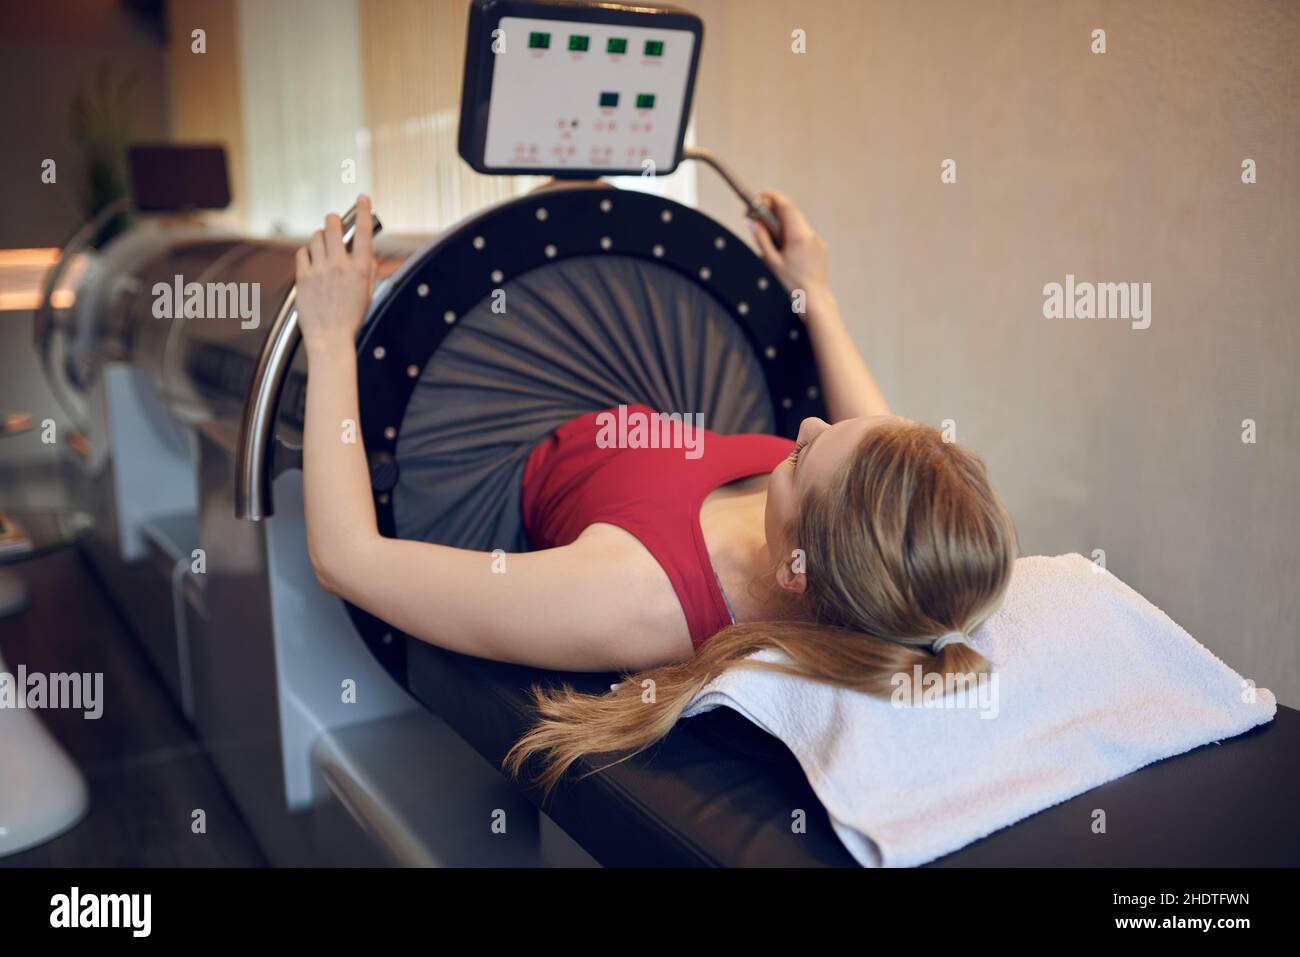 connective tissue, anti-aging, Suction Pump Massage, connective tissues, anti aging, antiaging Stock Photo